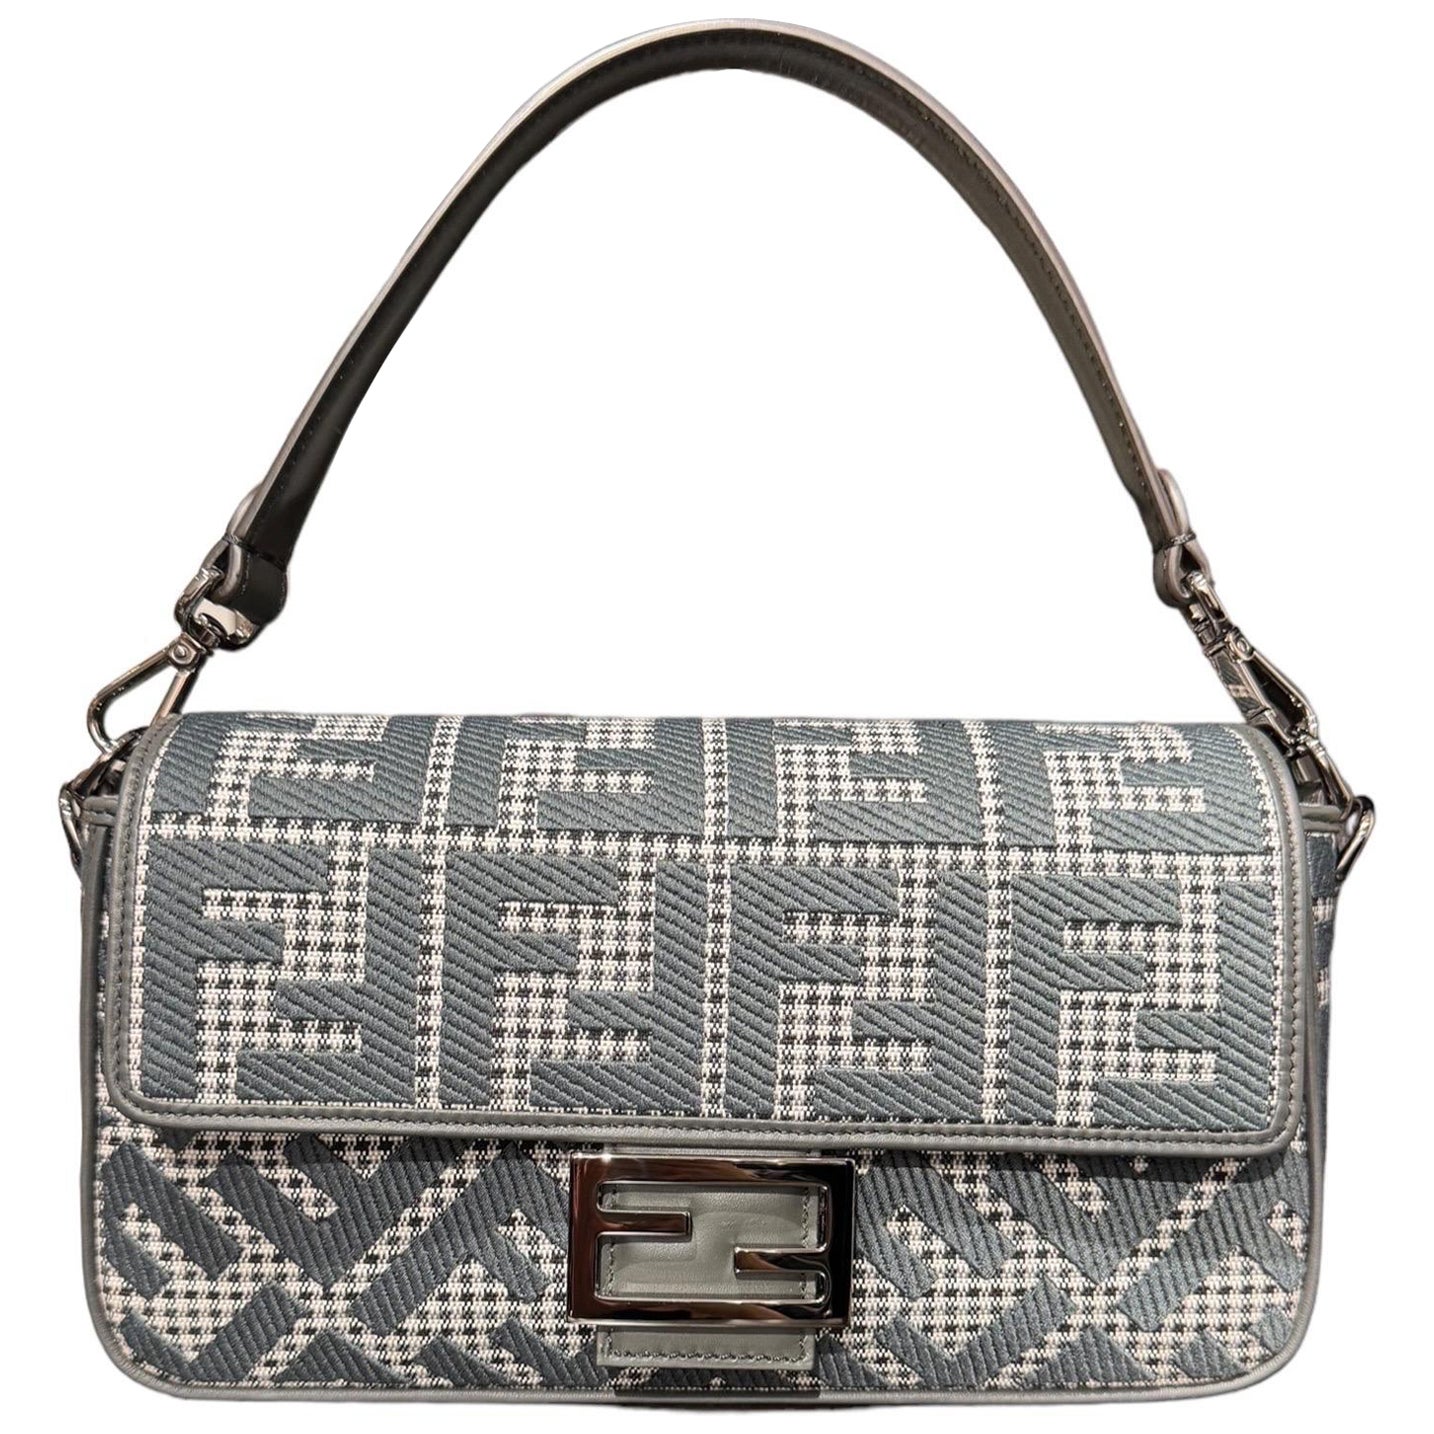 How much is a Fendi baguette?